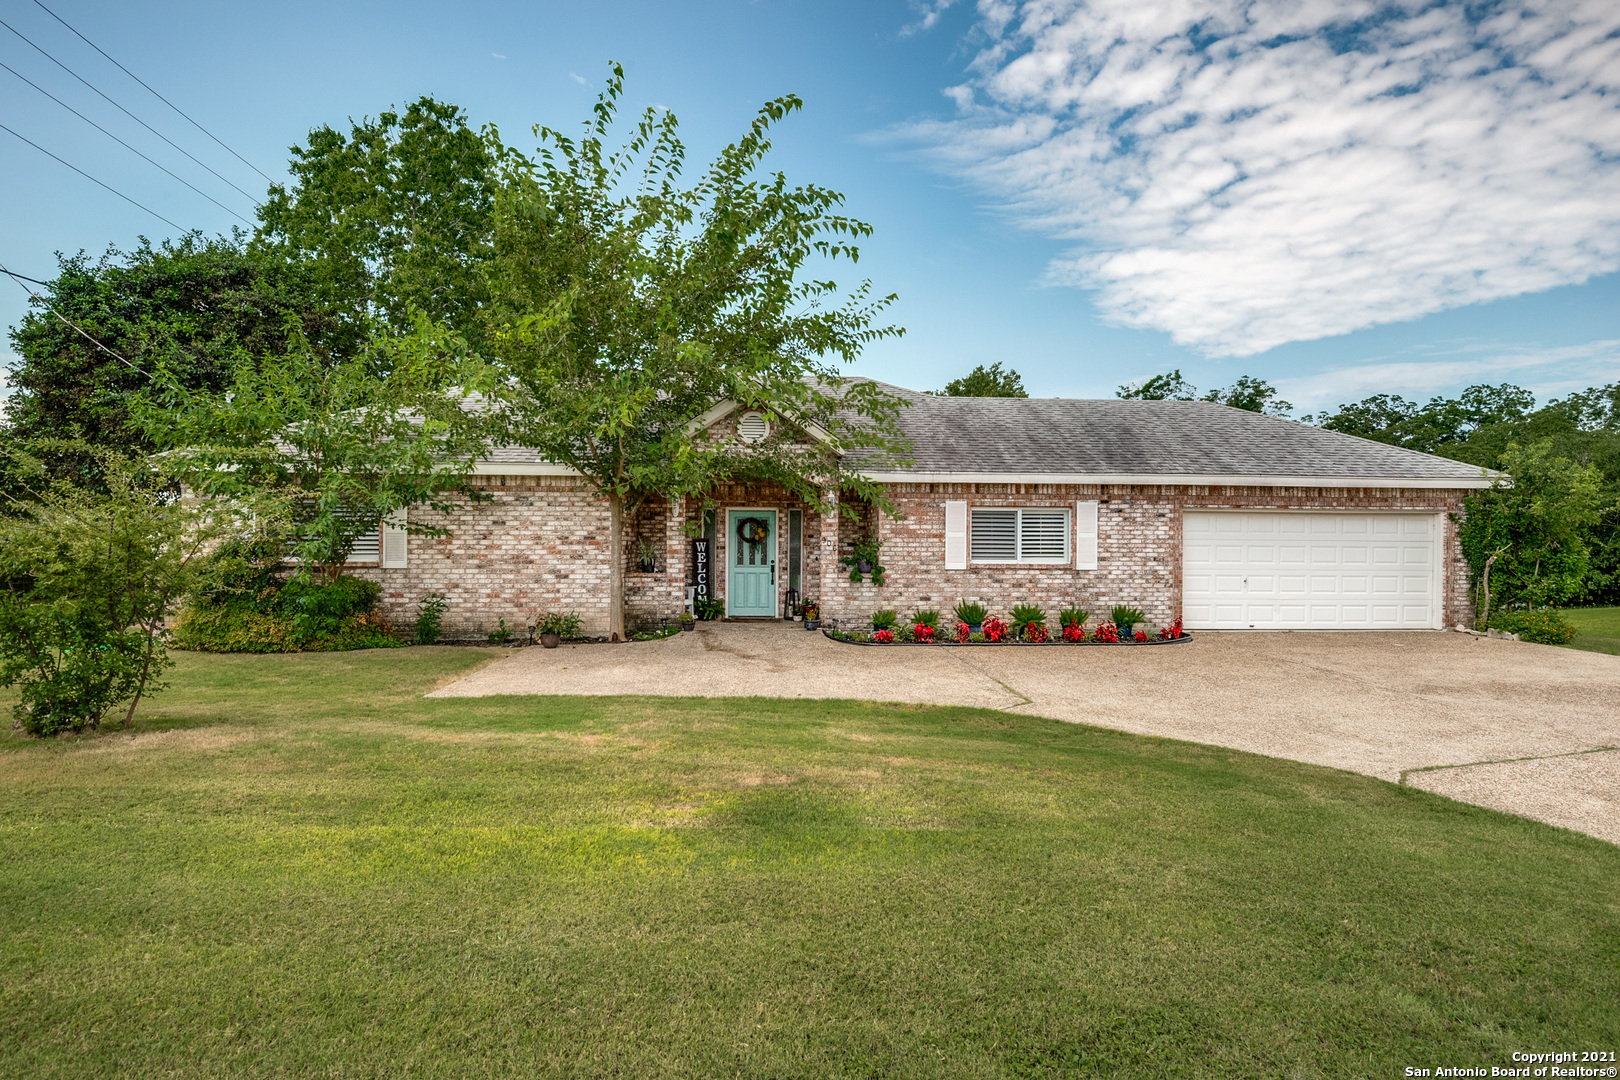 Amazing opportunity to own a Guadalupe Riverfront Lakefront (Lake Dunlap) Property! This Spacious home is located in the Highly sought after neighborhood of River Tree. Conveniently located only about 1 mile from IH35 in New Braunfels Tx. With over 3/4 of an acre and over 100' of water frontage to include Large Cypress trees and a view overlooking the River and Park! 3 Great Size Bedrooms and 2 Full Bathrooms! Open Floor Plan with tons of windows! No Neighbors Behind or on one side!